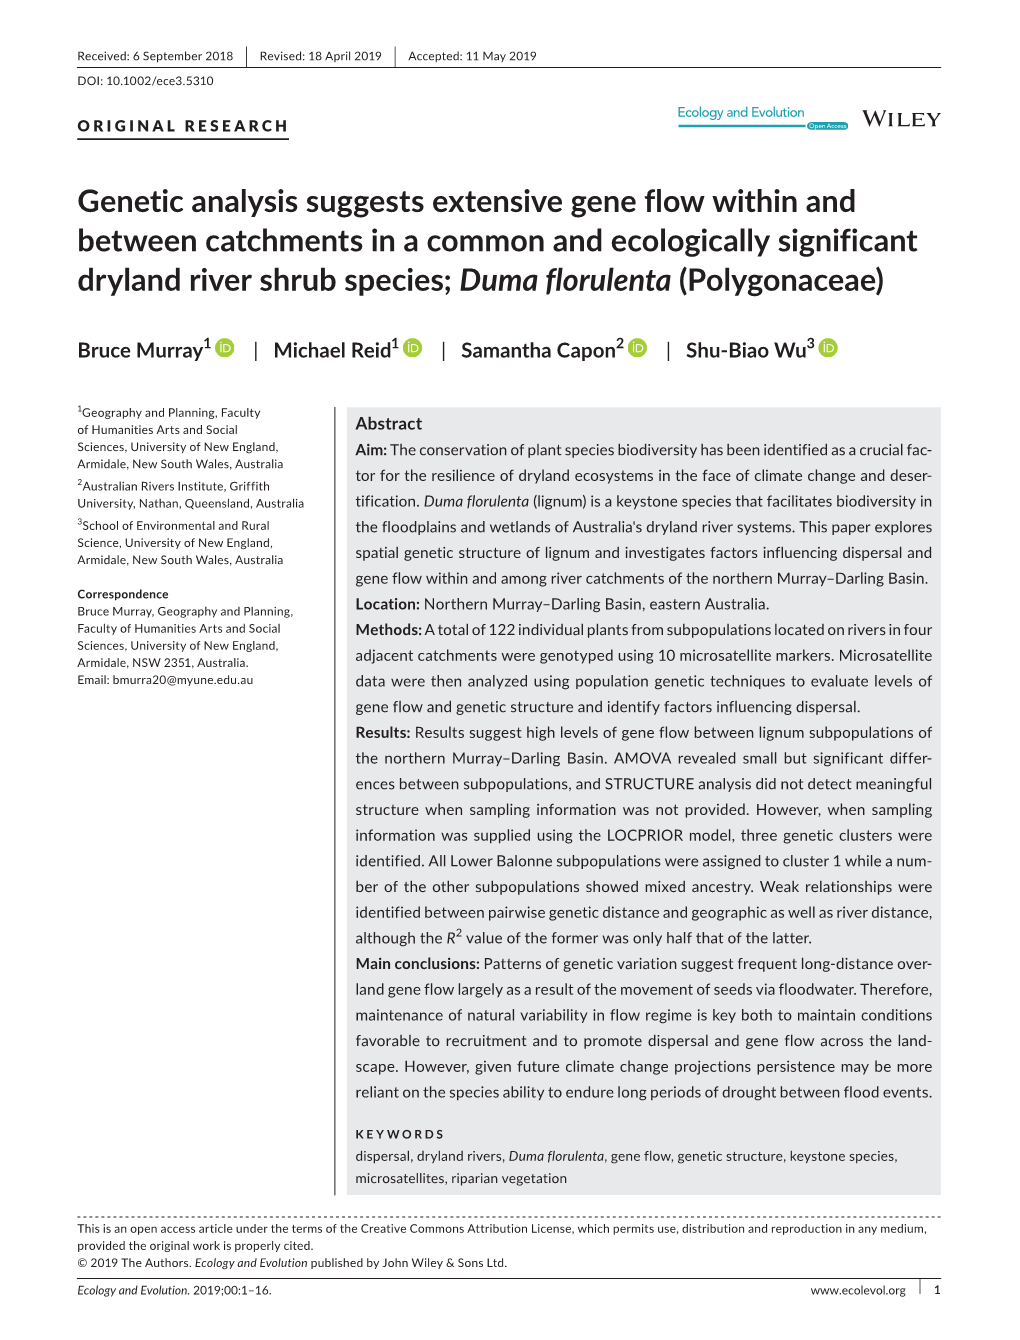 Genetic Analysis Suggests Extensive Gene Flow Within and Between